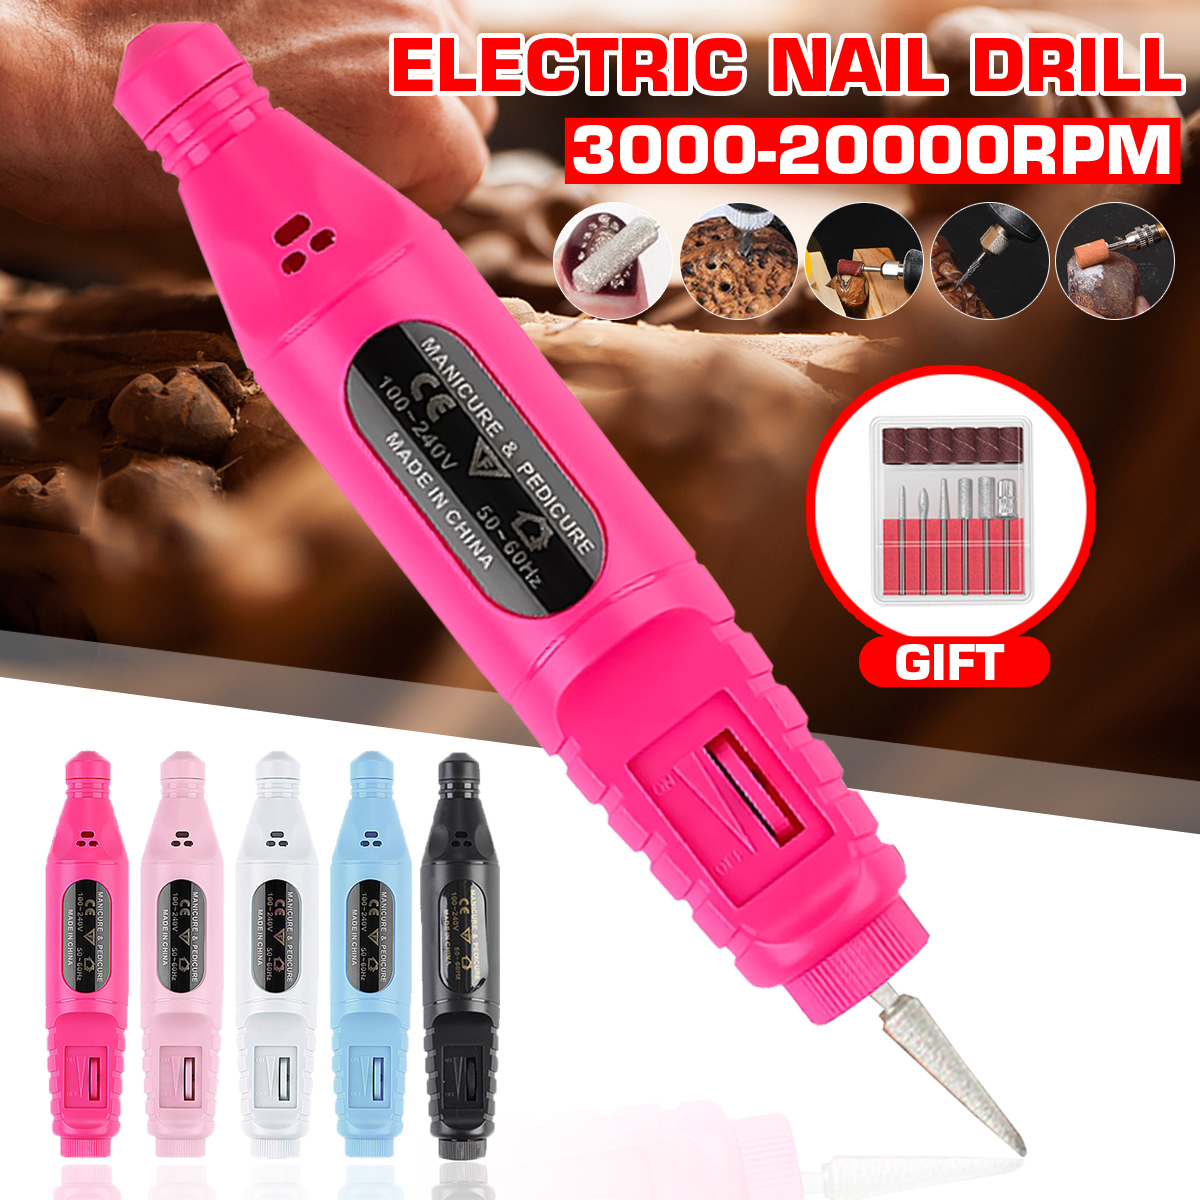 3000-20000-Adjustable-Speed-Pedicure-Manicure-Nail-Polisher-Drill-Electric-Nail-Drill-Machine-USB-Ch-1693708-2